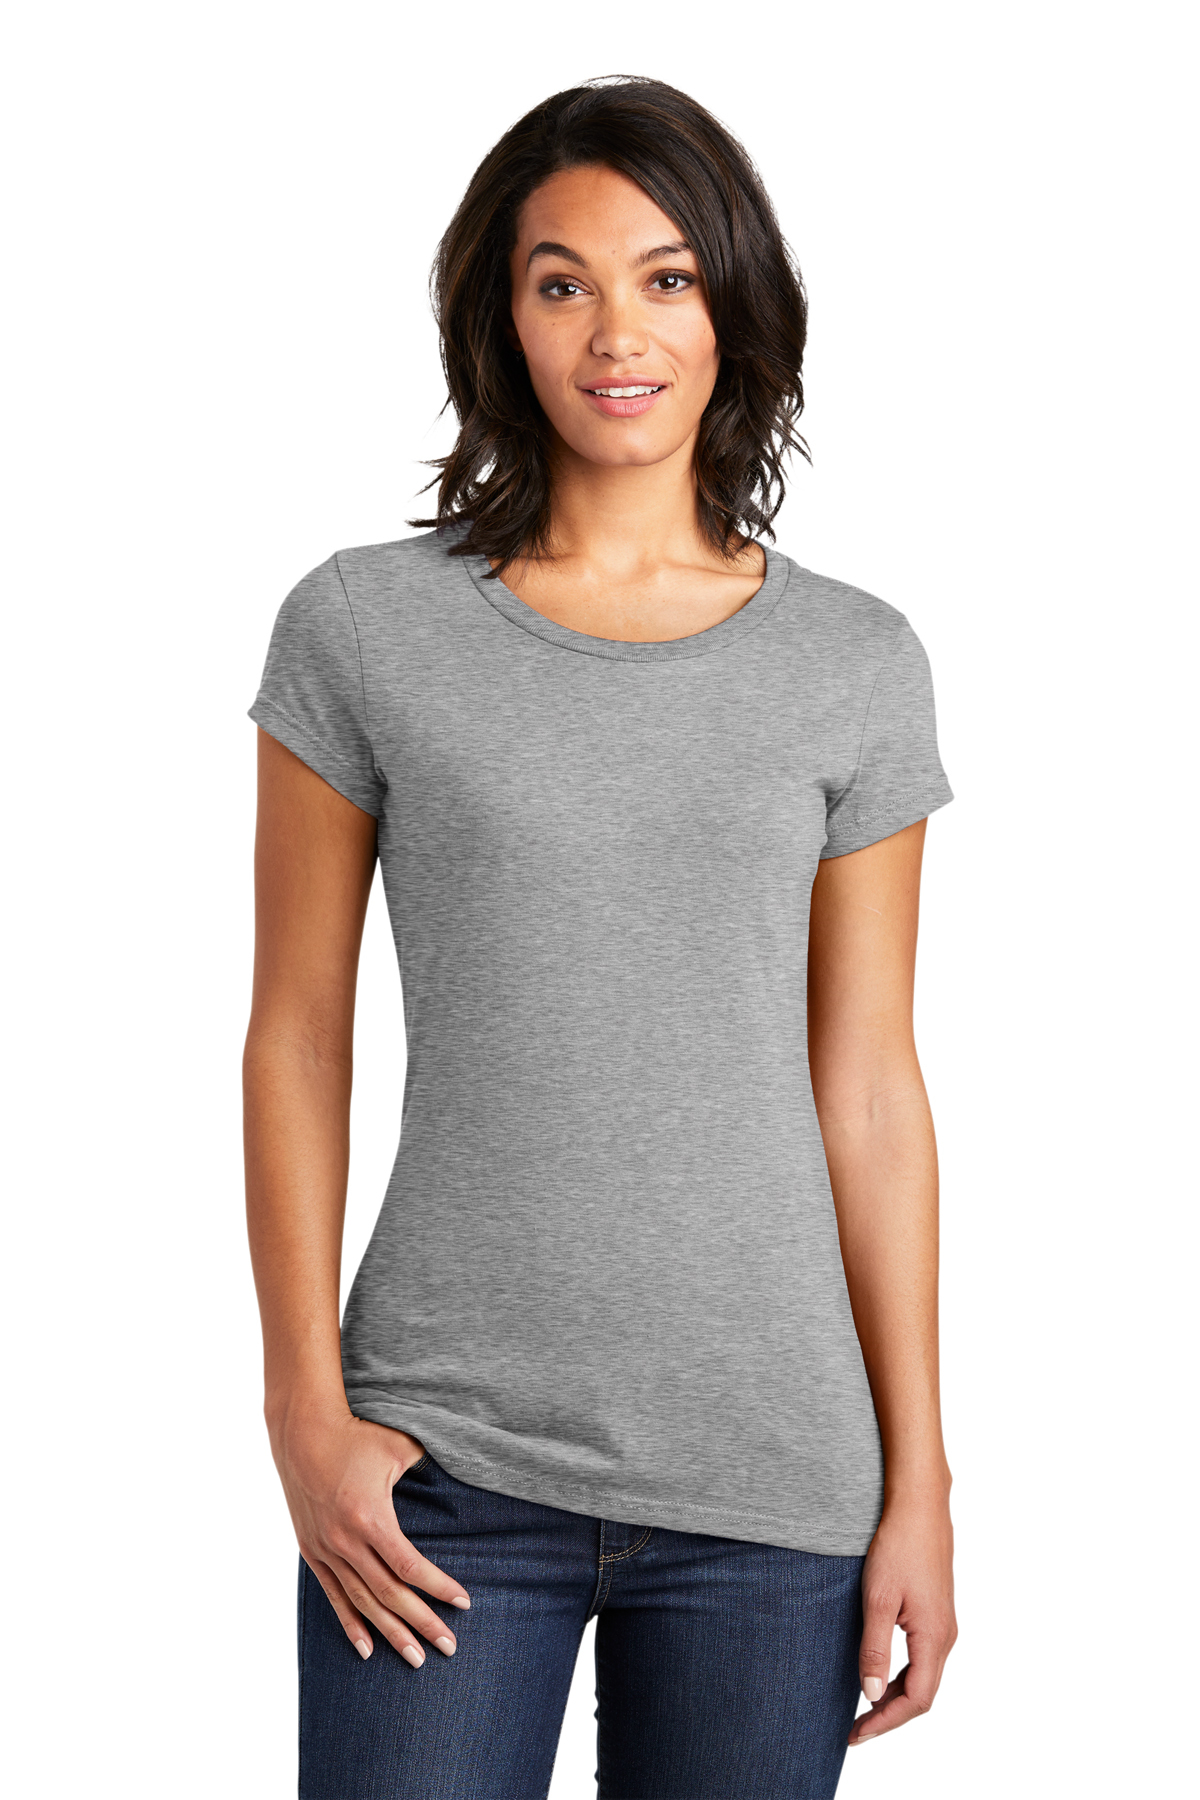 District Women’s Fitted Very Important Tee | Product | Company Casuals